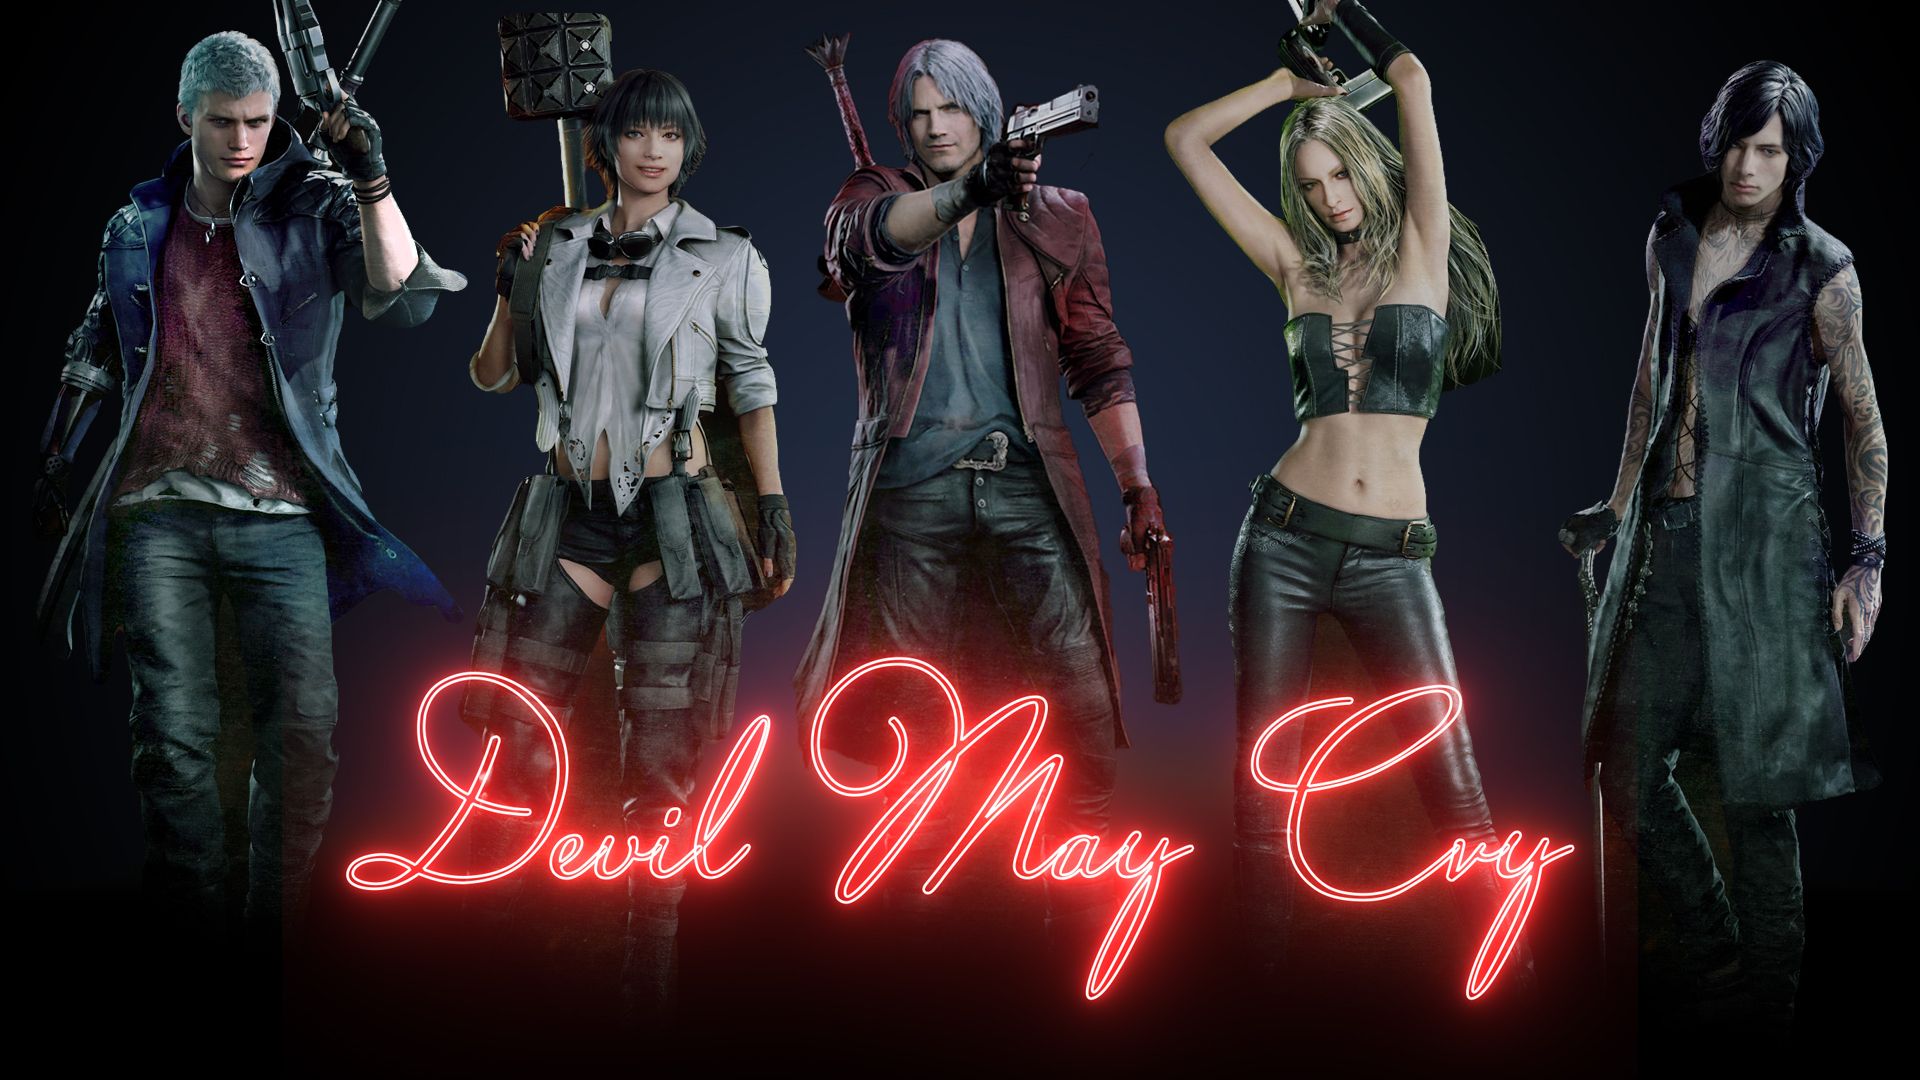 Wallpaper, Devil May Cry, devil may cry Dante Devil May Cry, Nero Devil May Cry, Lady Devil May Cry 1920x1080